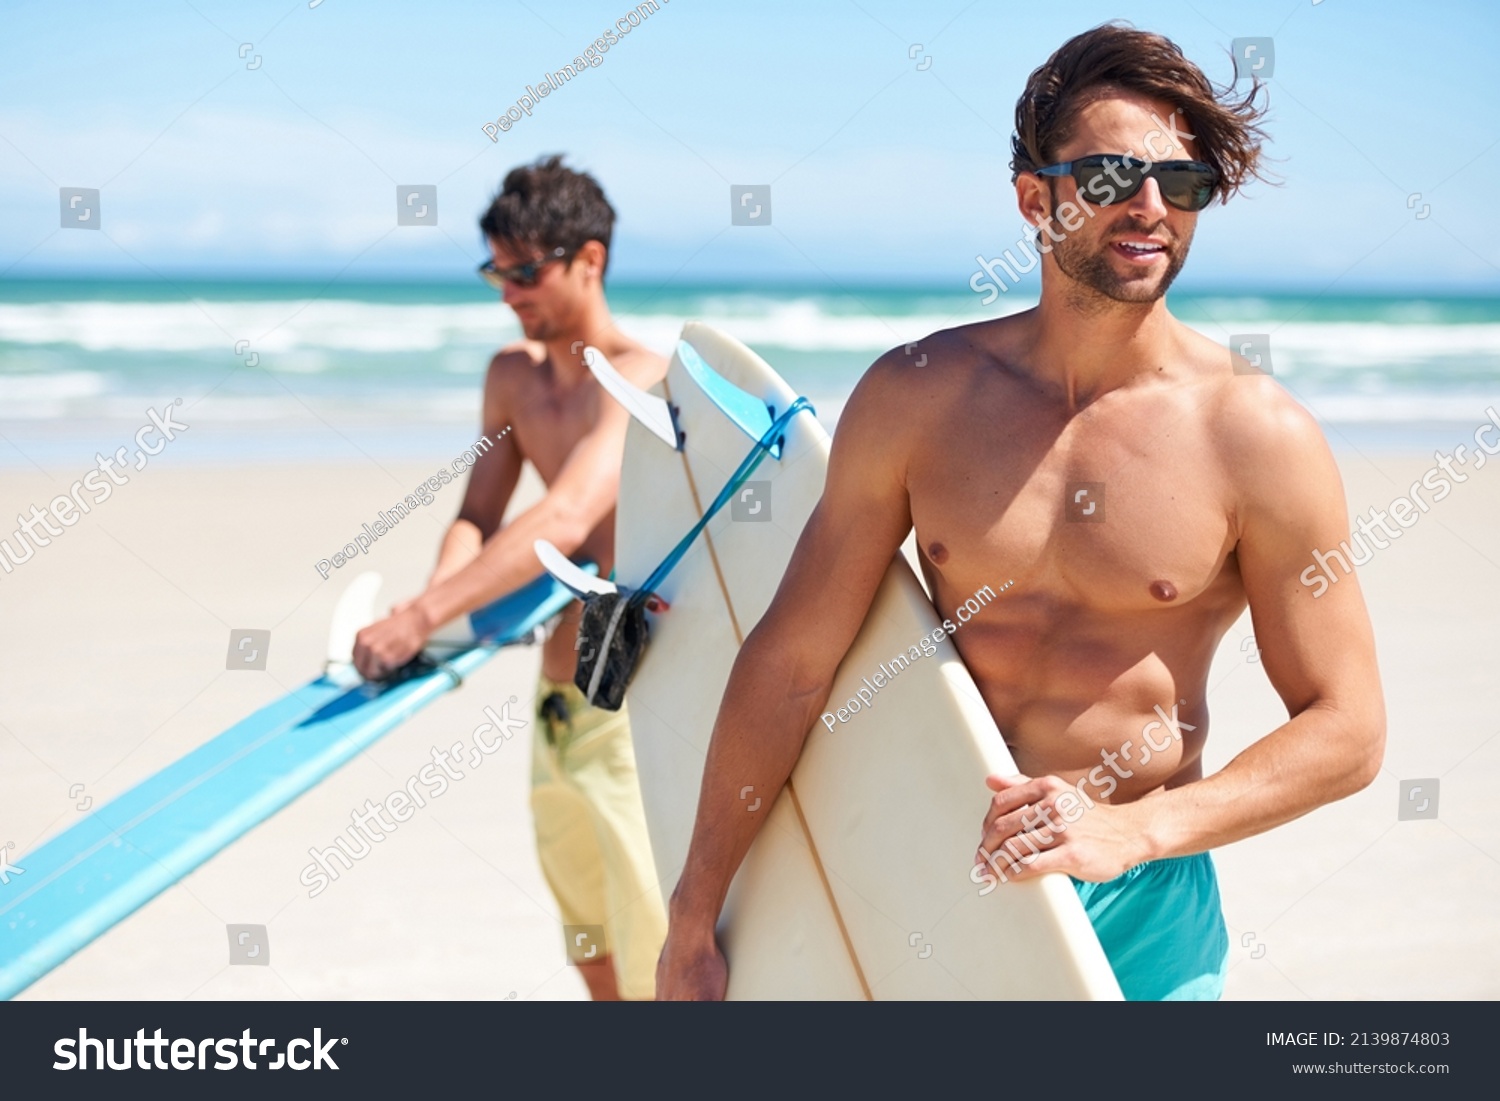 Surfs up. Two friends at the beach getting ready to head into the water for a surf. #2139874803